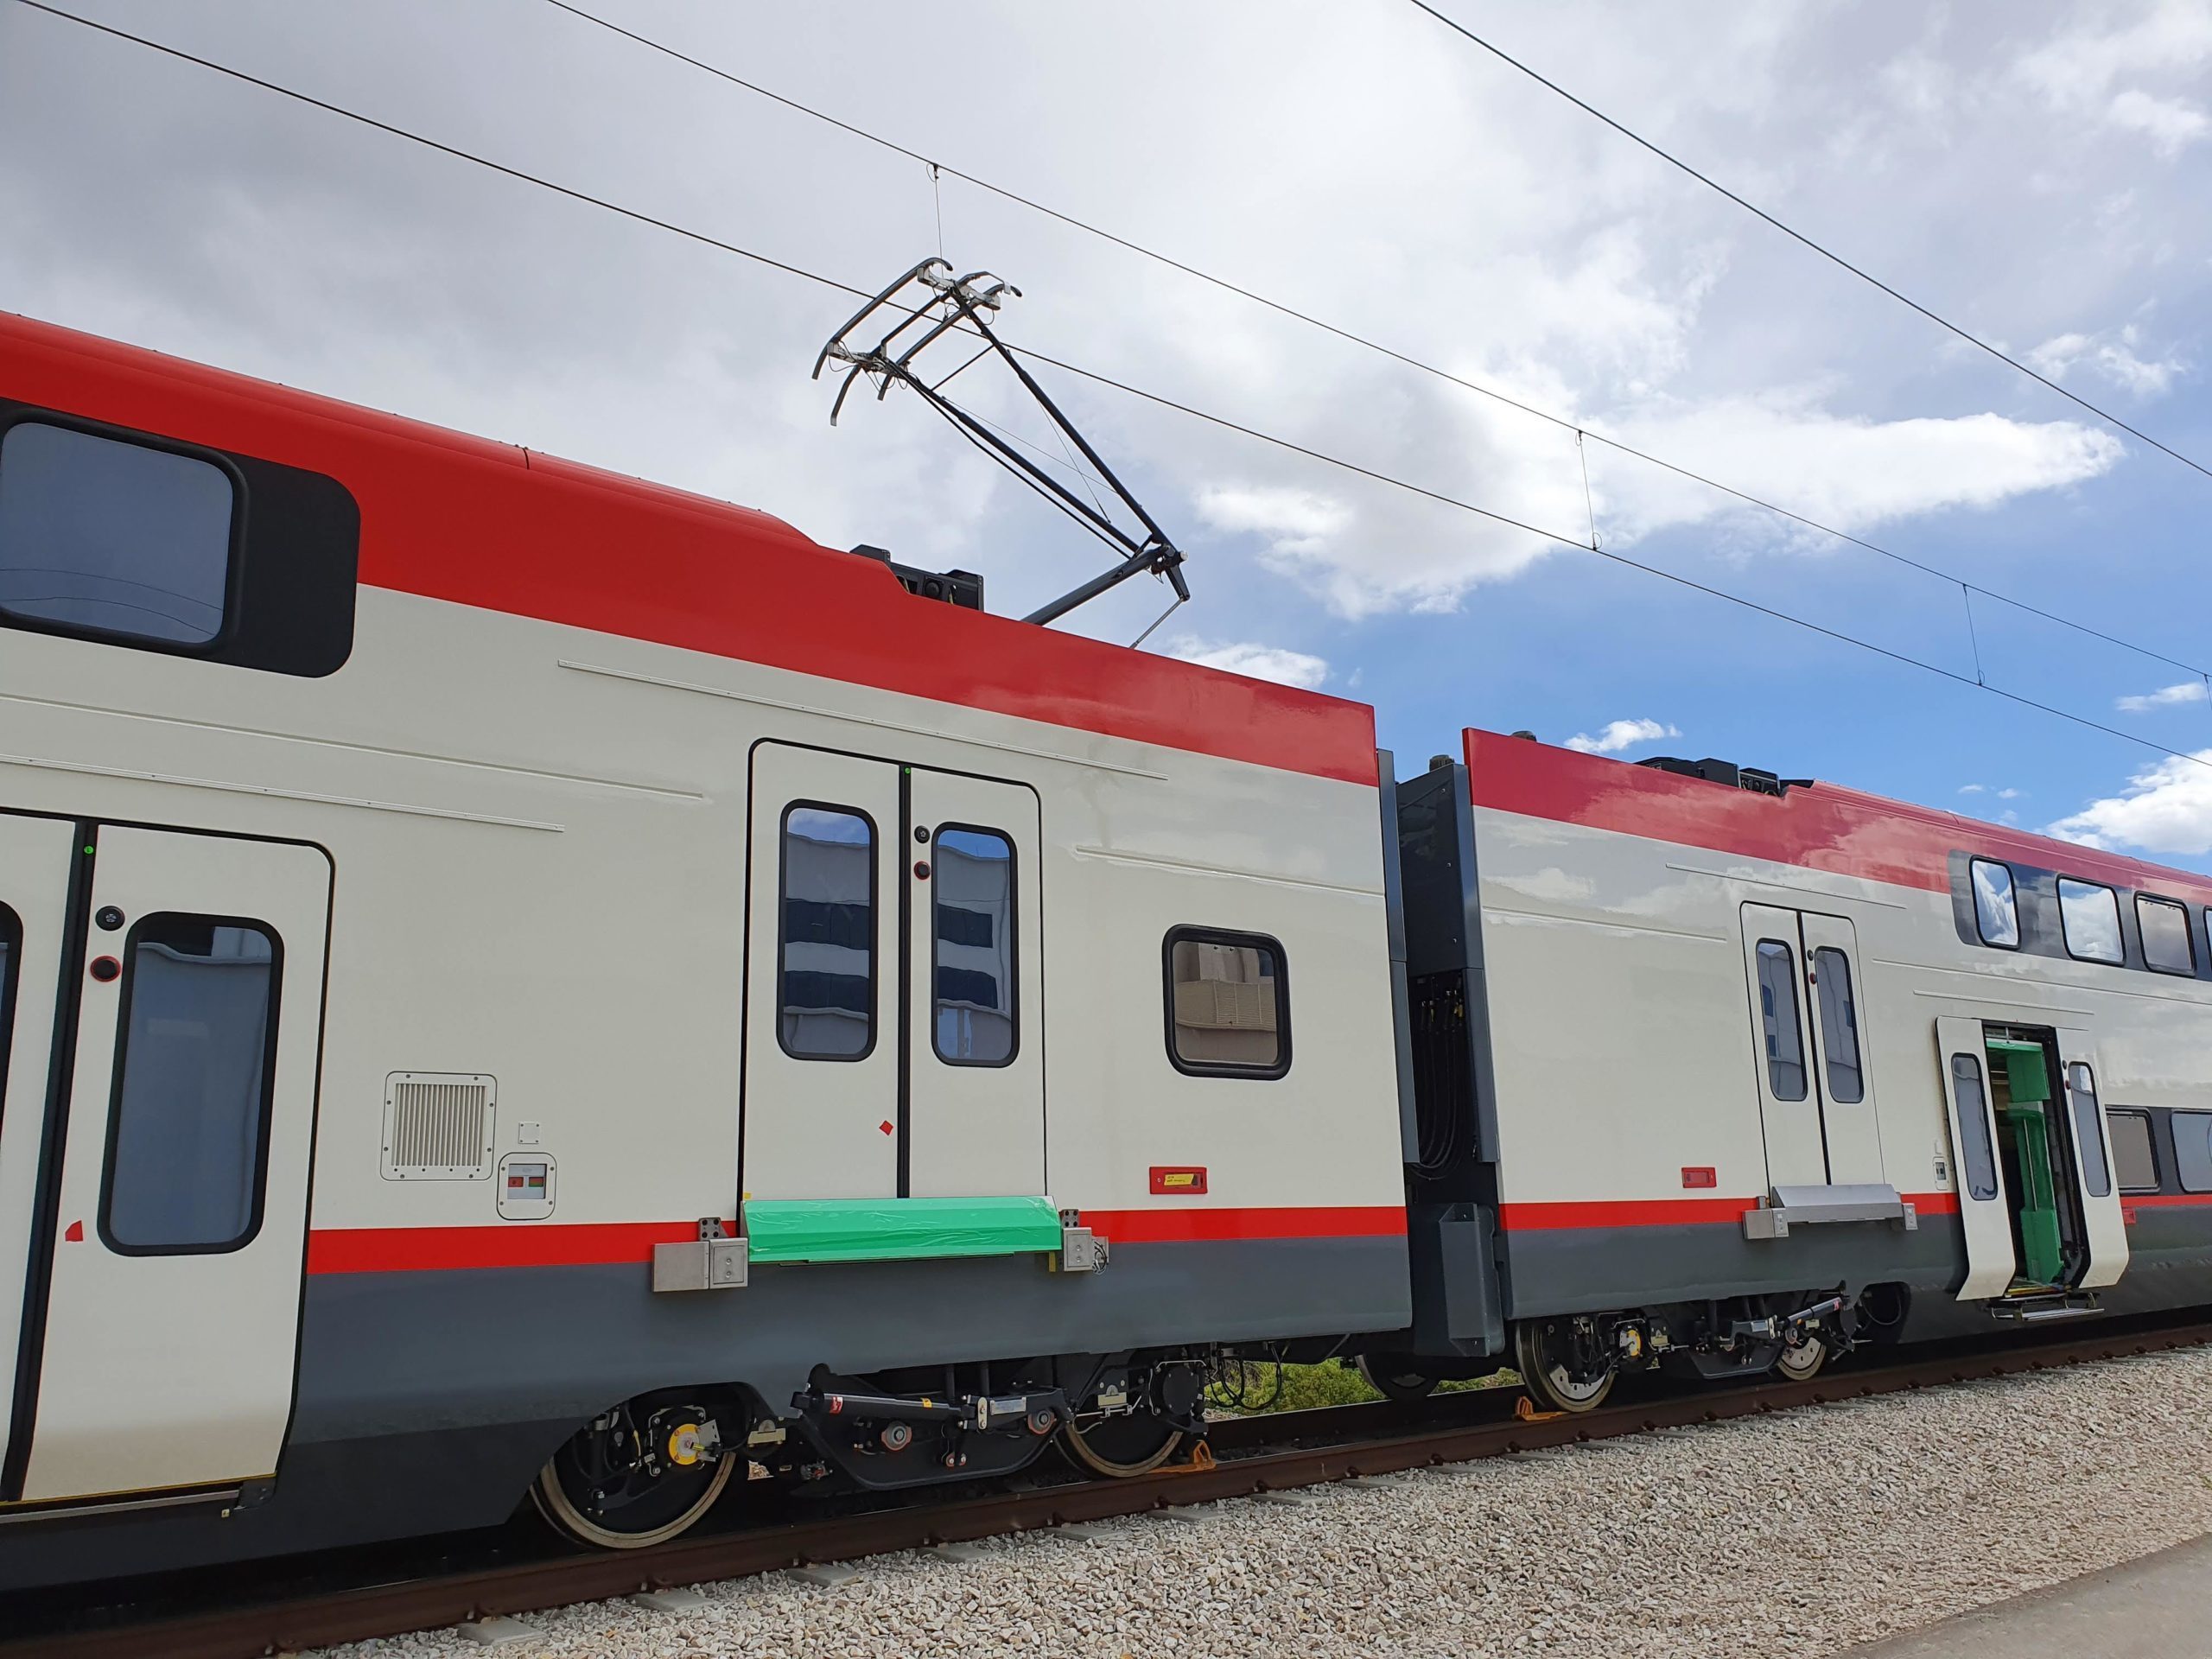 One of Caltrain's first electric train sets. Metrolink, LA's equivalent of Caltrain, uses diesels and has no plan to electrify. Photo: Caltrain